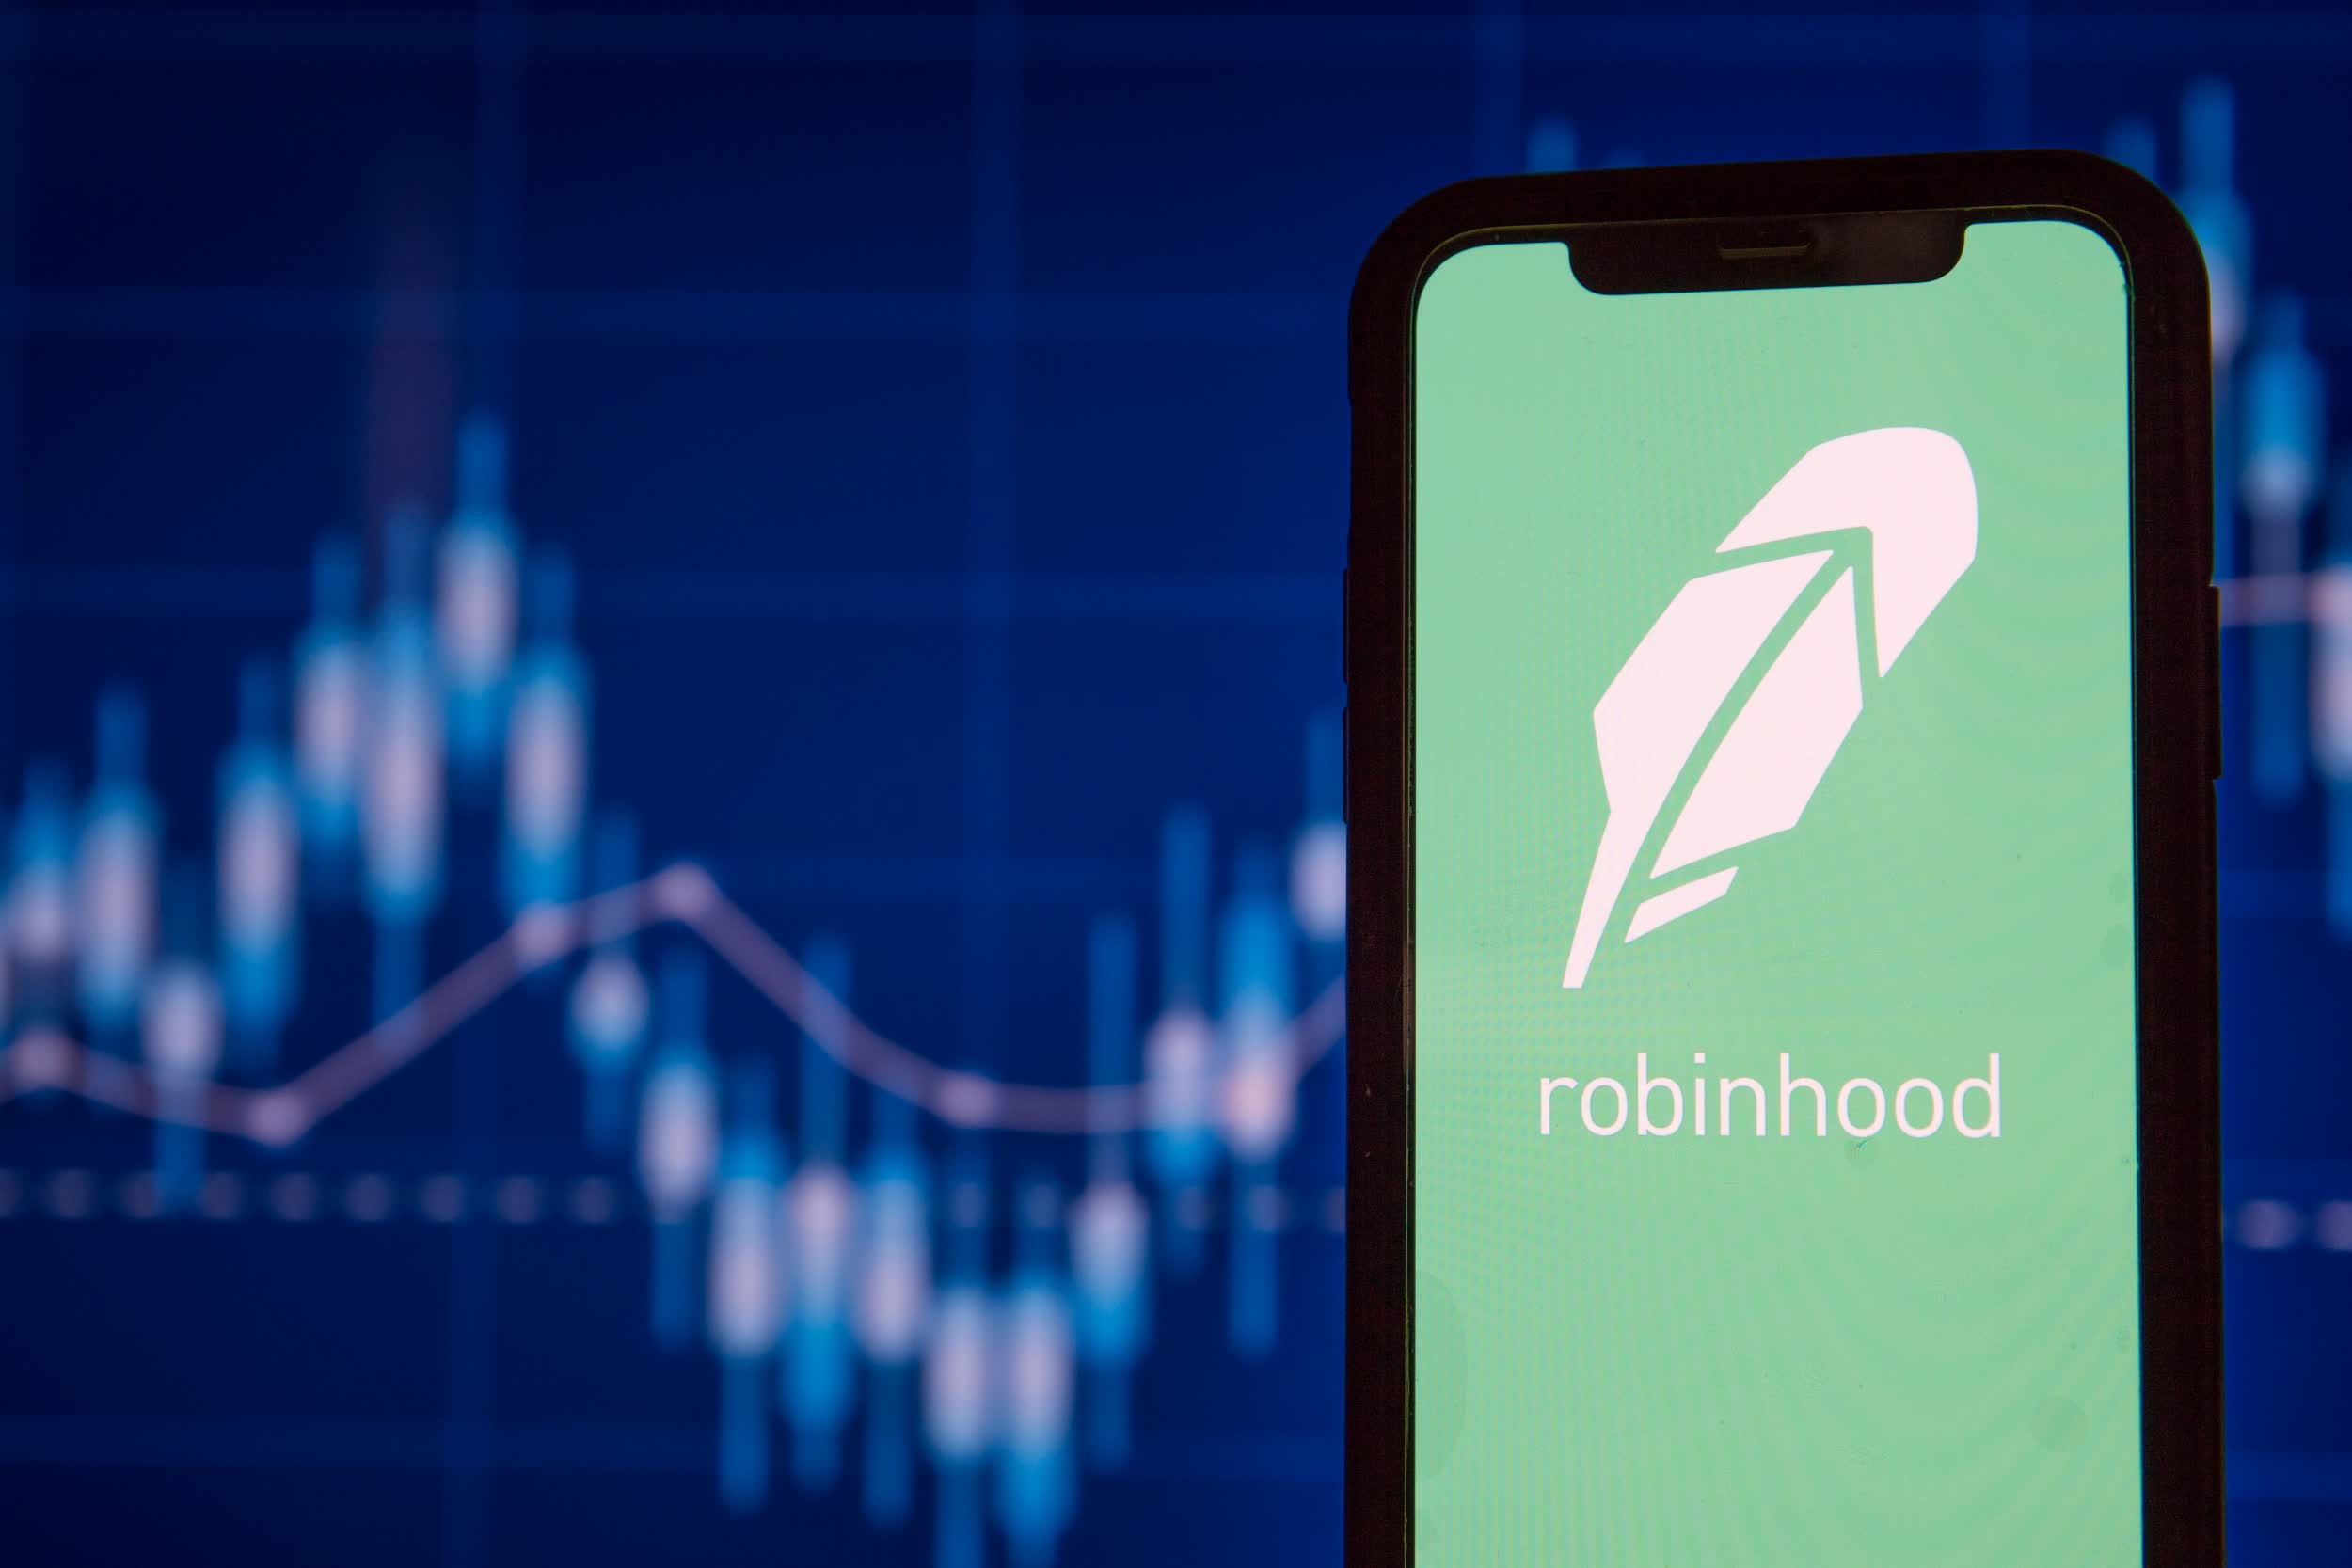 Millions are flocking to Robinhood to trade cryptocurrencies